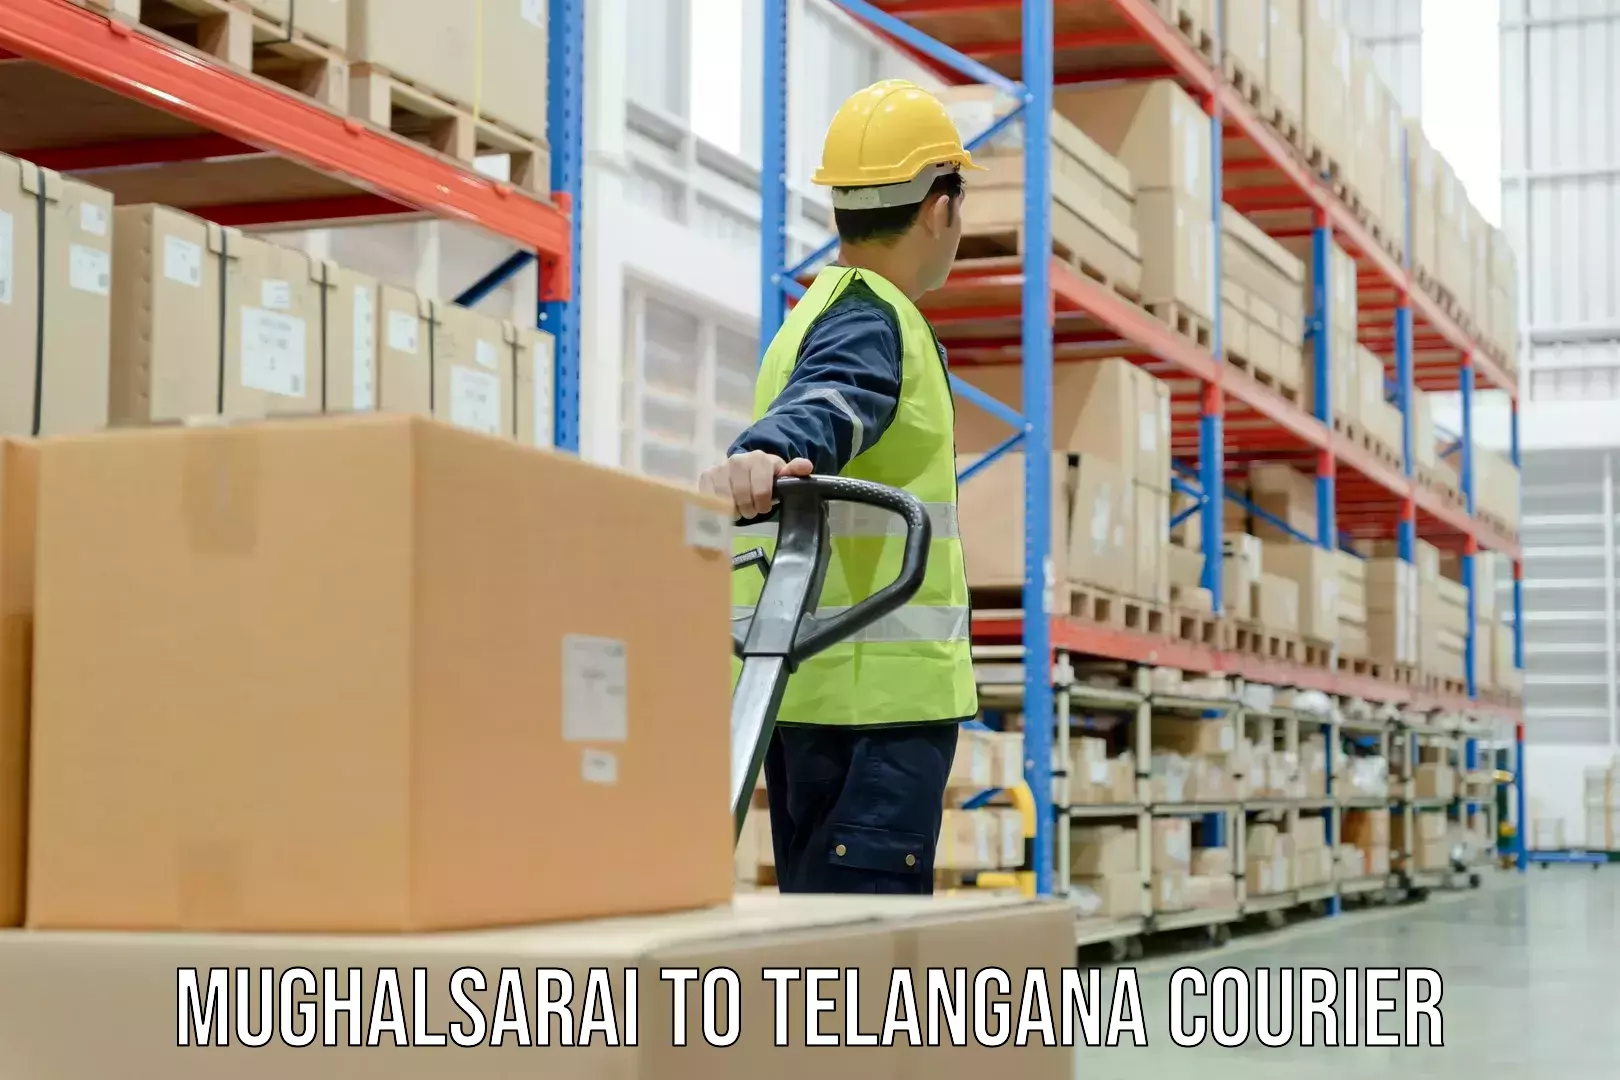 Professional courier services in Mughalsarai to Sultanabad